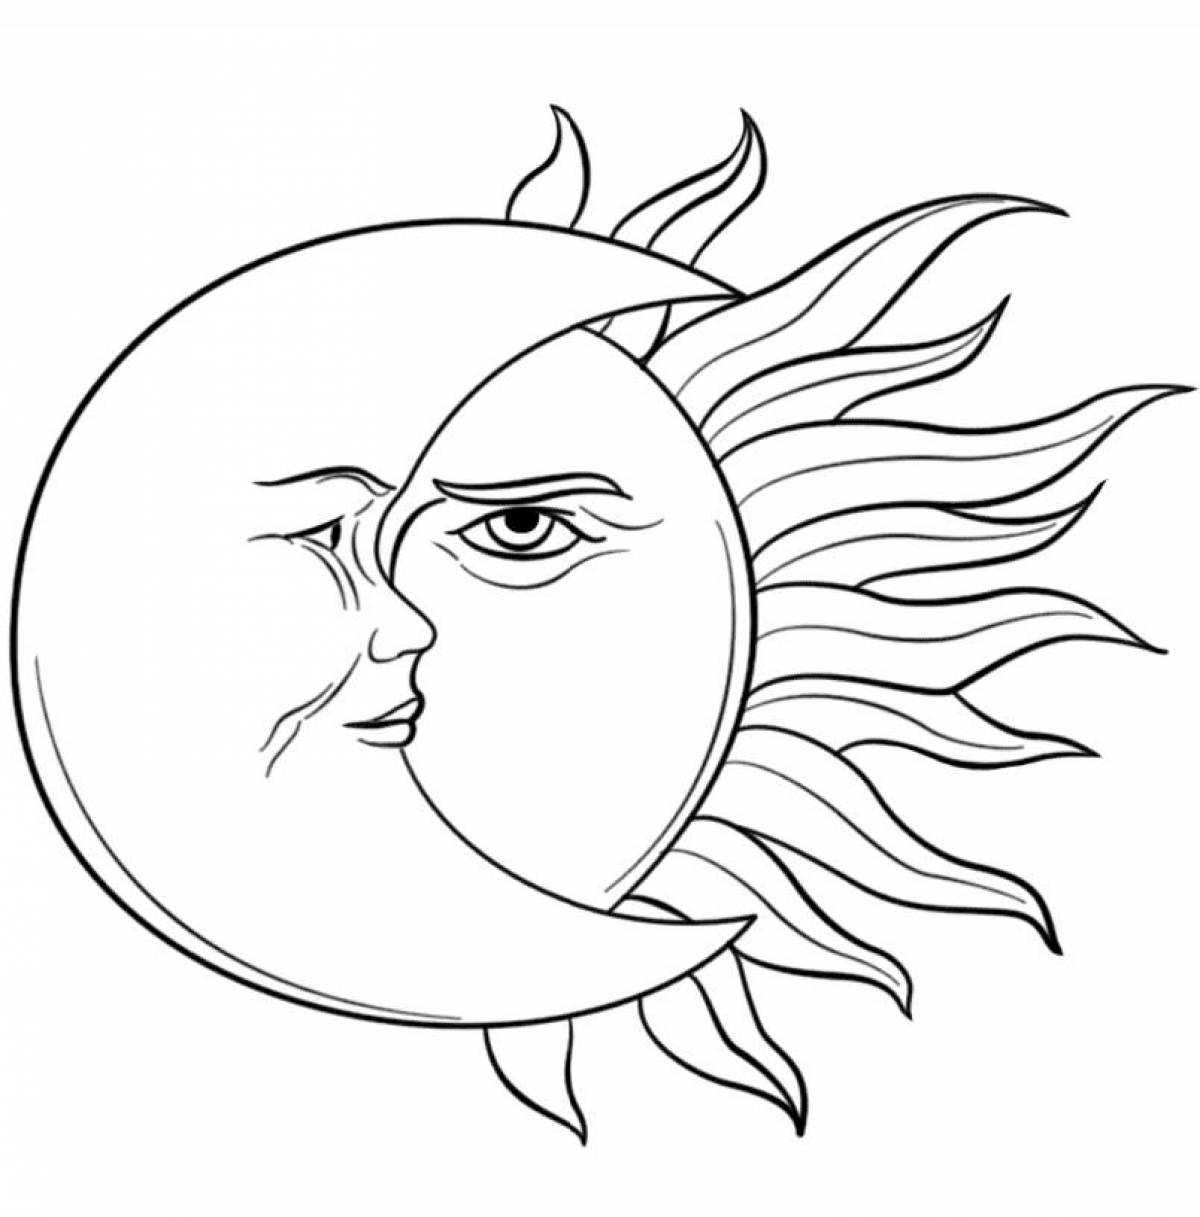 Flawless sun and moon coloring page